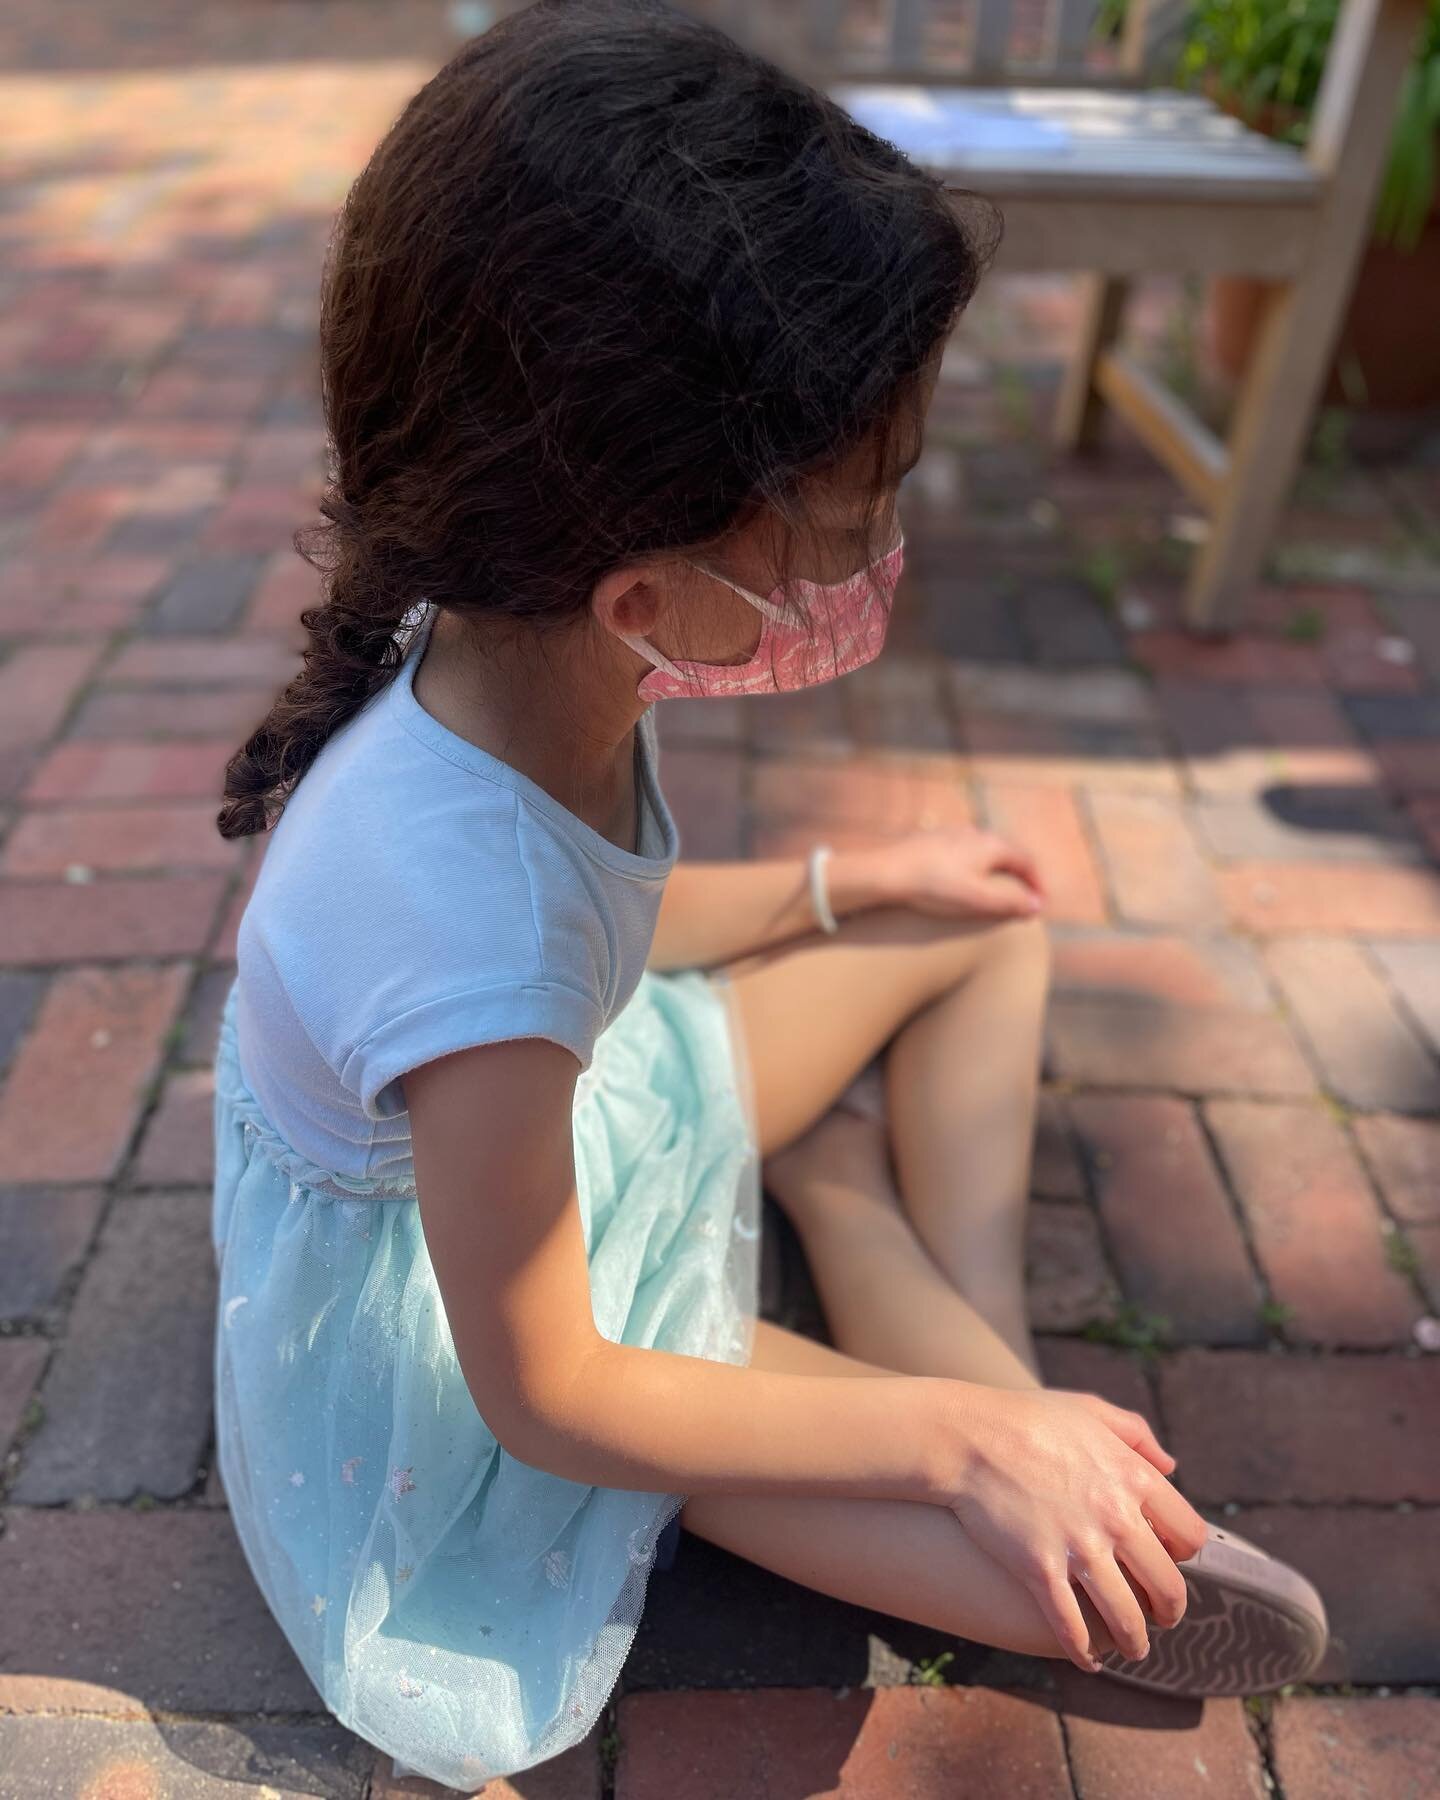 🤩Yo! Kids is a Yoga Mouth Studio program that introduces the science of mindfulness and yoga psychology to kids. 

💕Today one of our afterschool programs explored Fell's Point with a &quot;Feelings Scavenger Hunt.&quot;

😎It was so cool to see the